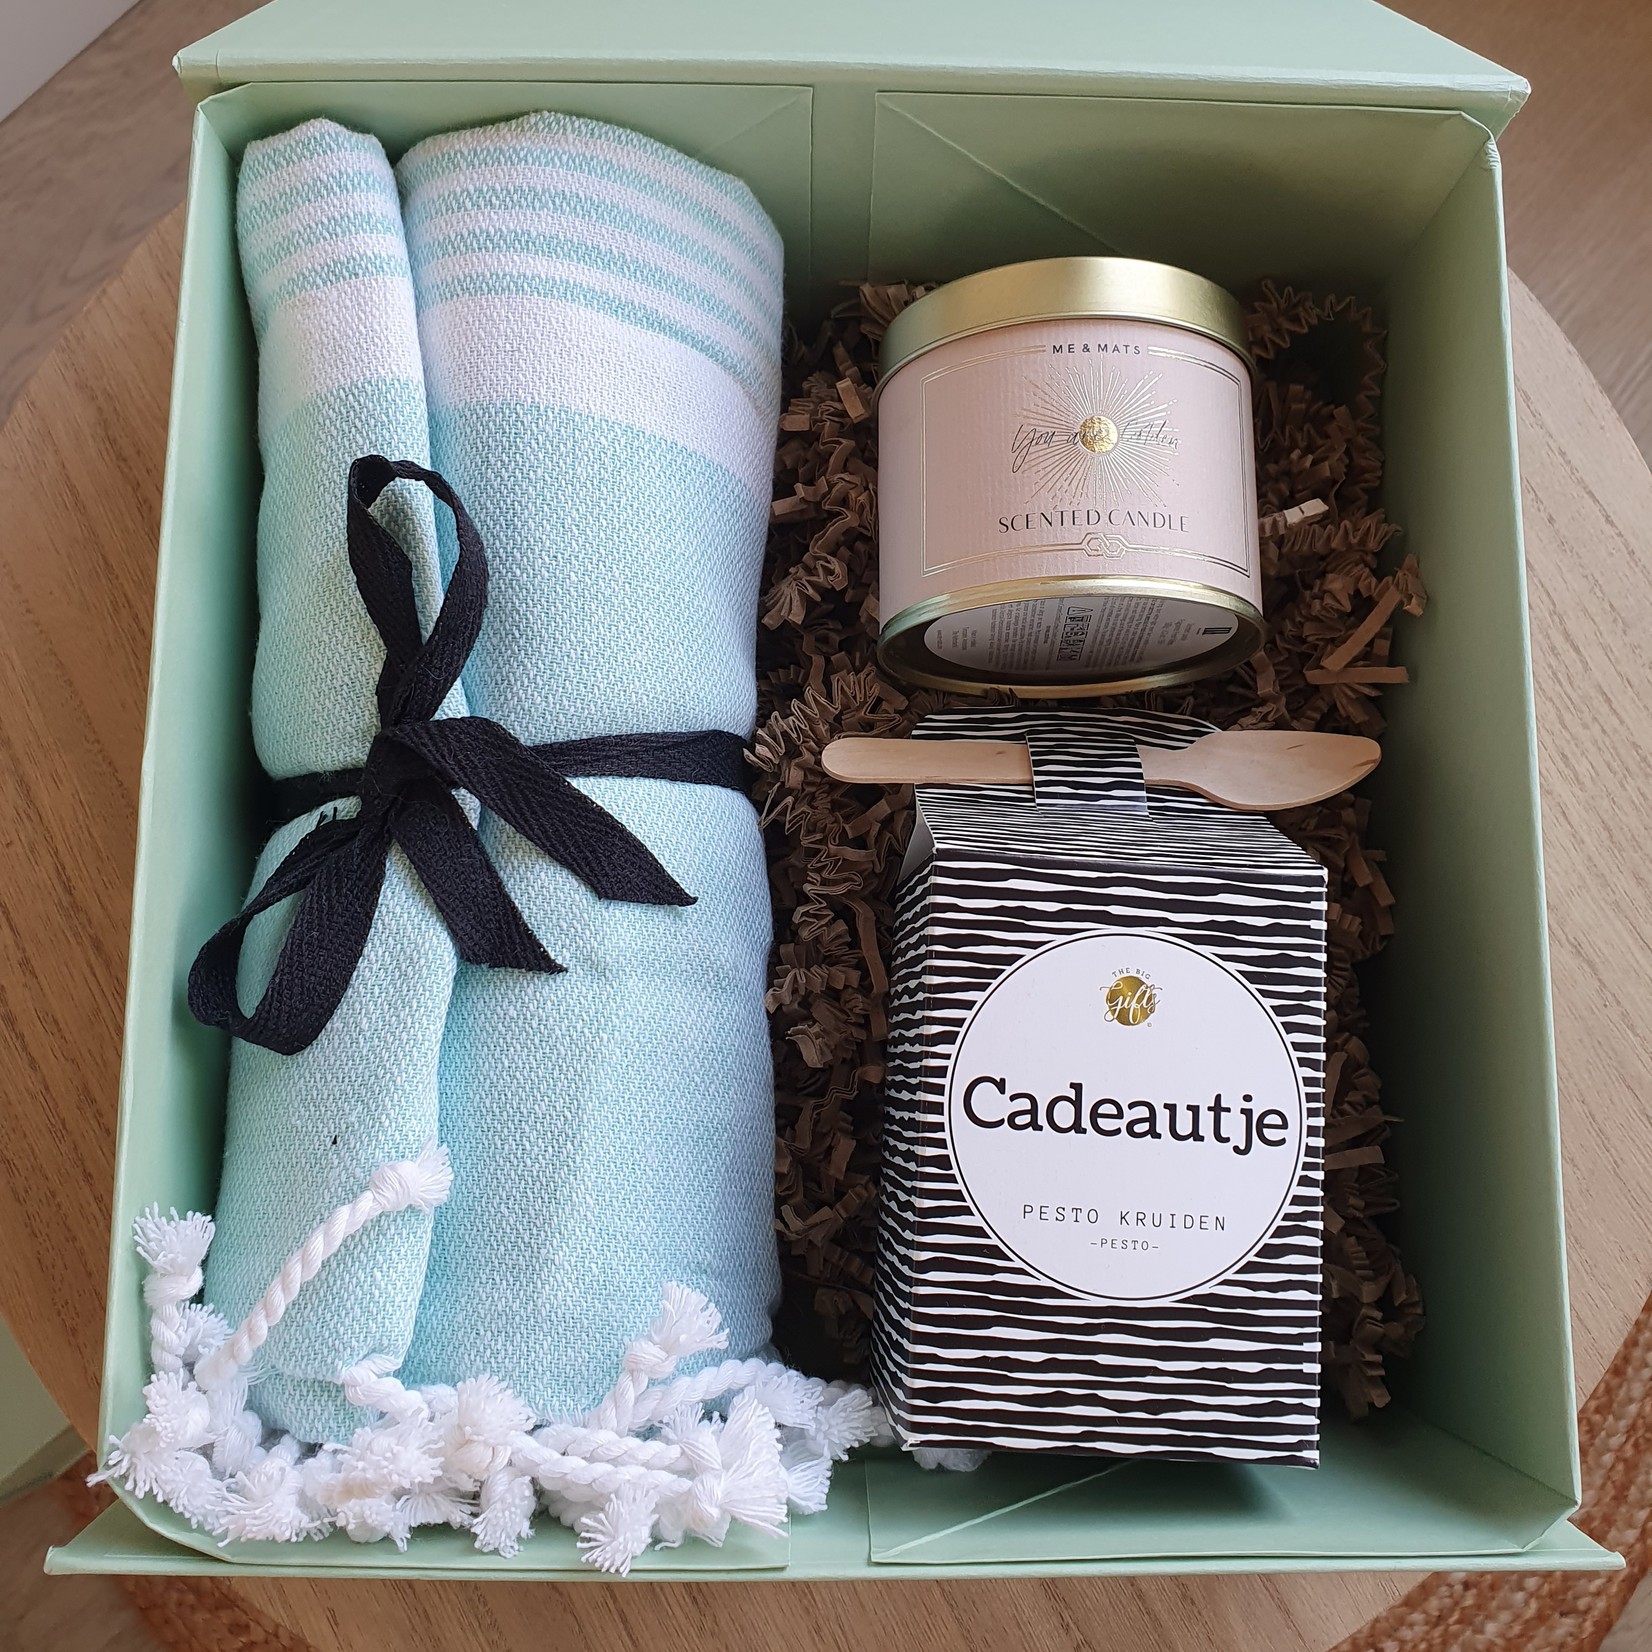 Eve's Gifts Gift Box Mint- cadeautje candle